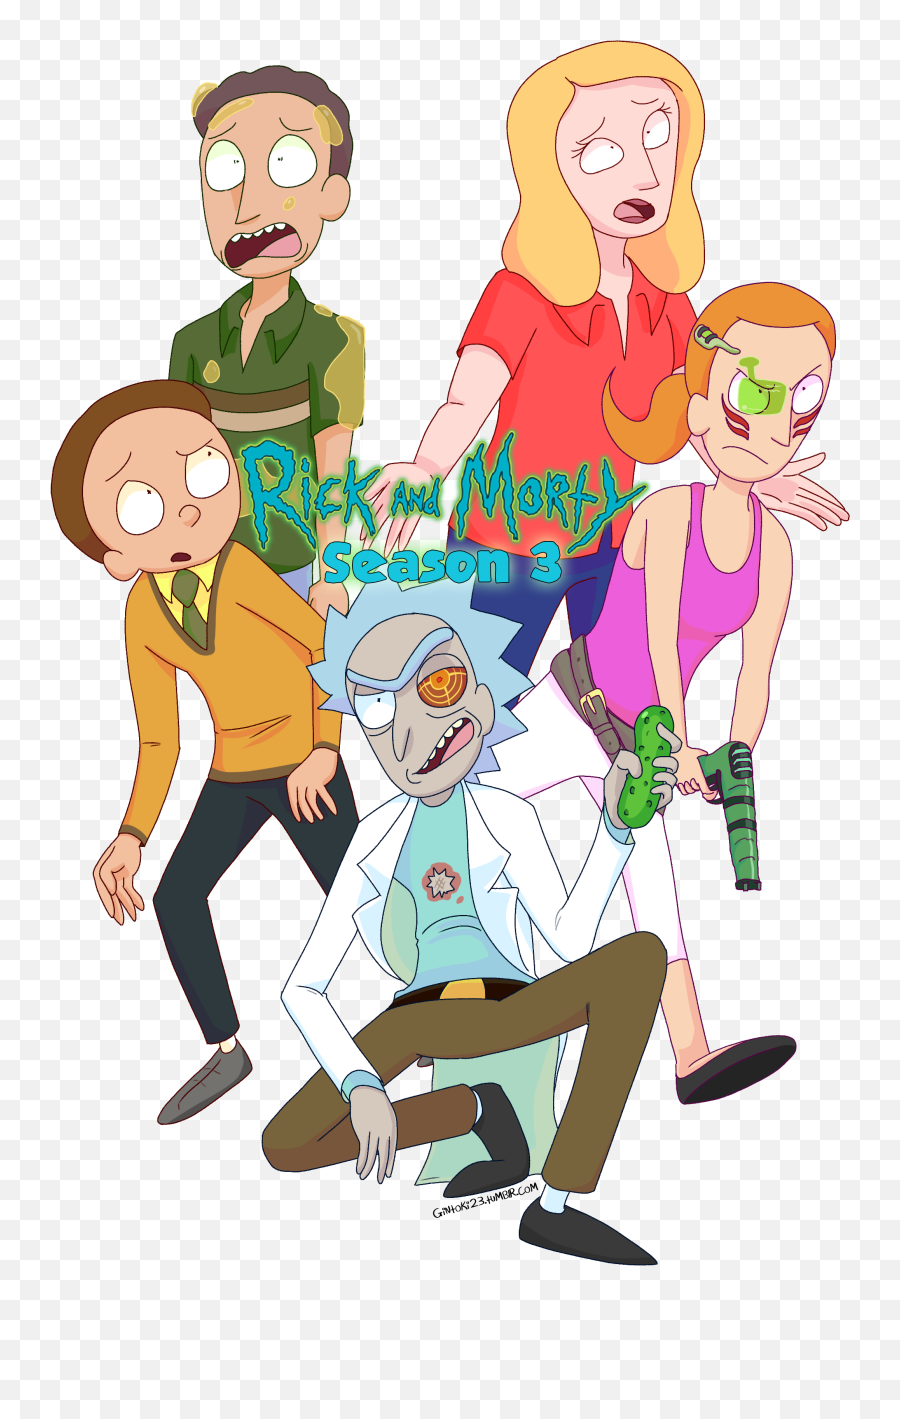 Watch Rick And Morty Season 3 Episode 6 - Rick And Morty Hype Emoji,Rick And Morty Transparent